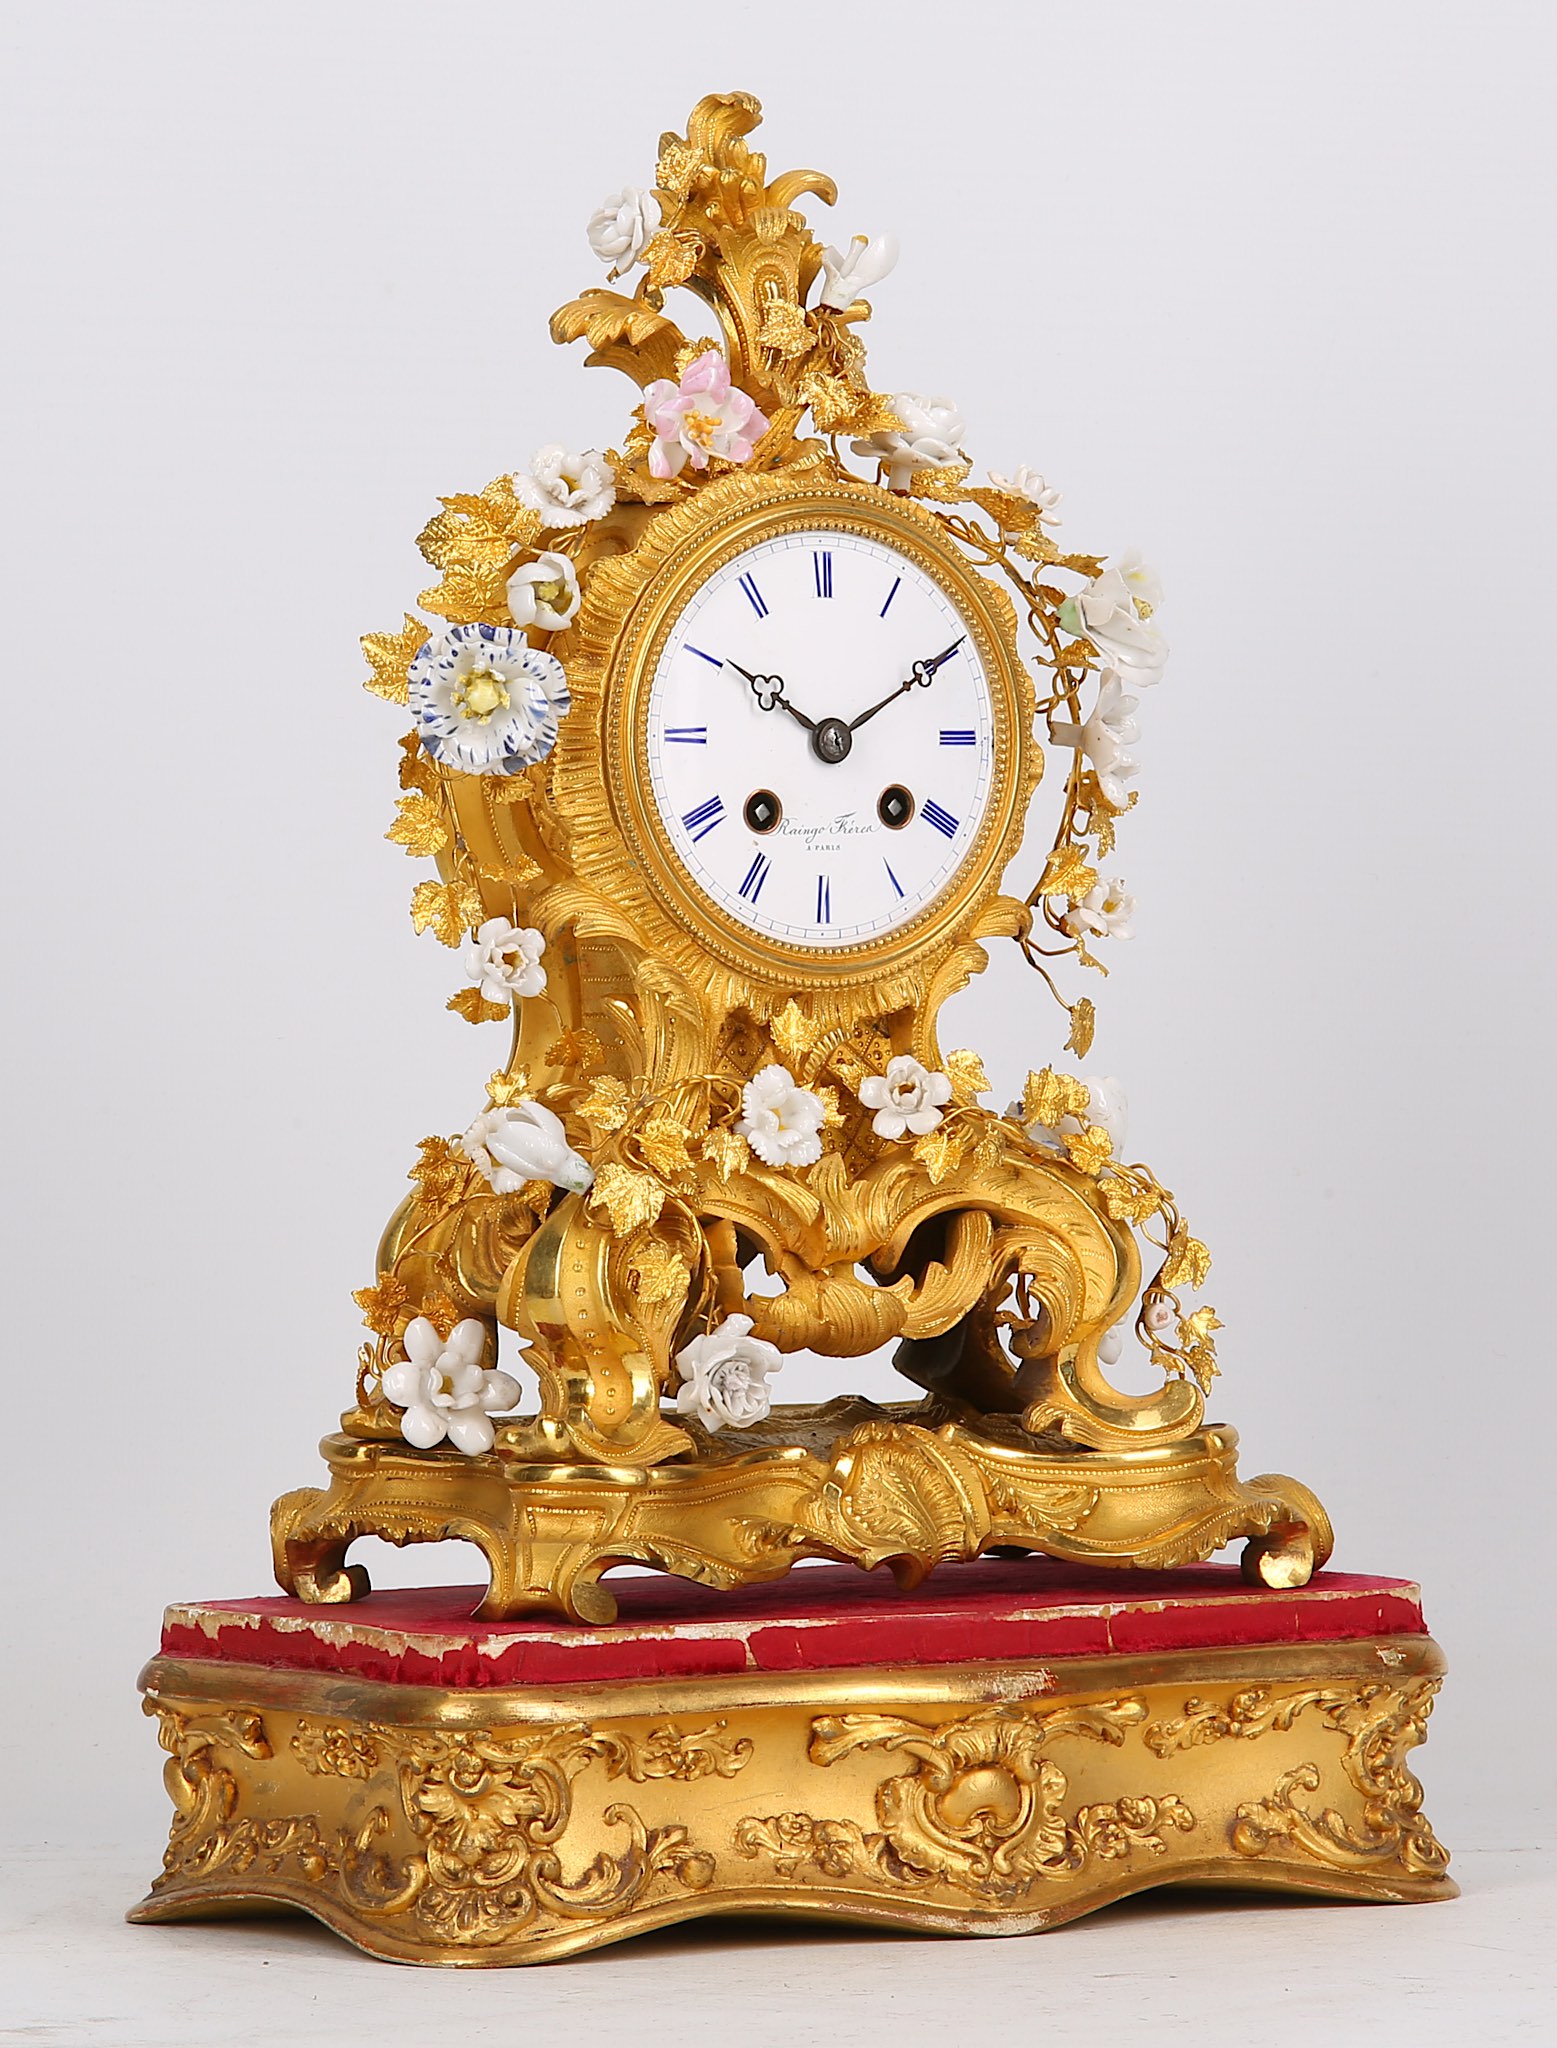 A MID 19TH CENTURY FRENCH GILT BRONZE AND PORCELAIN MOUNTED MANTEL CLOCK BY RAINGO FRERES, PARIS the - Image 5 of 9